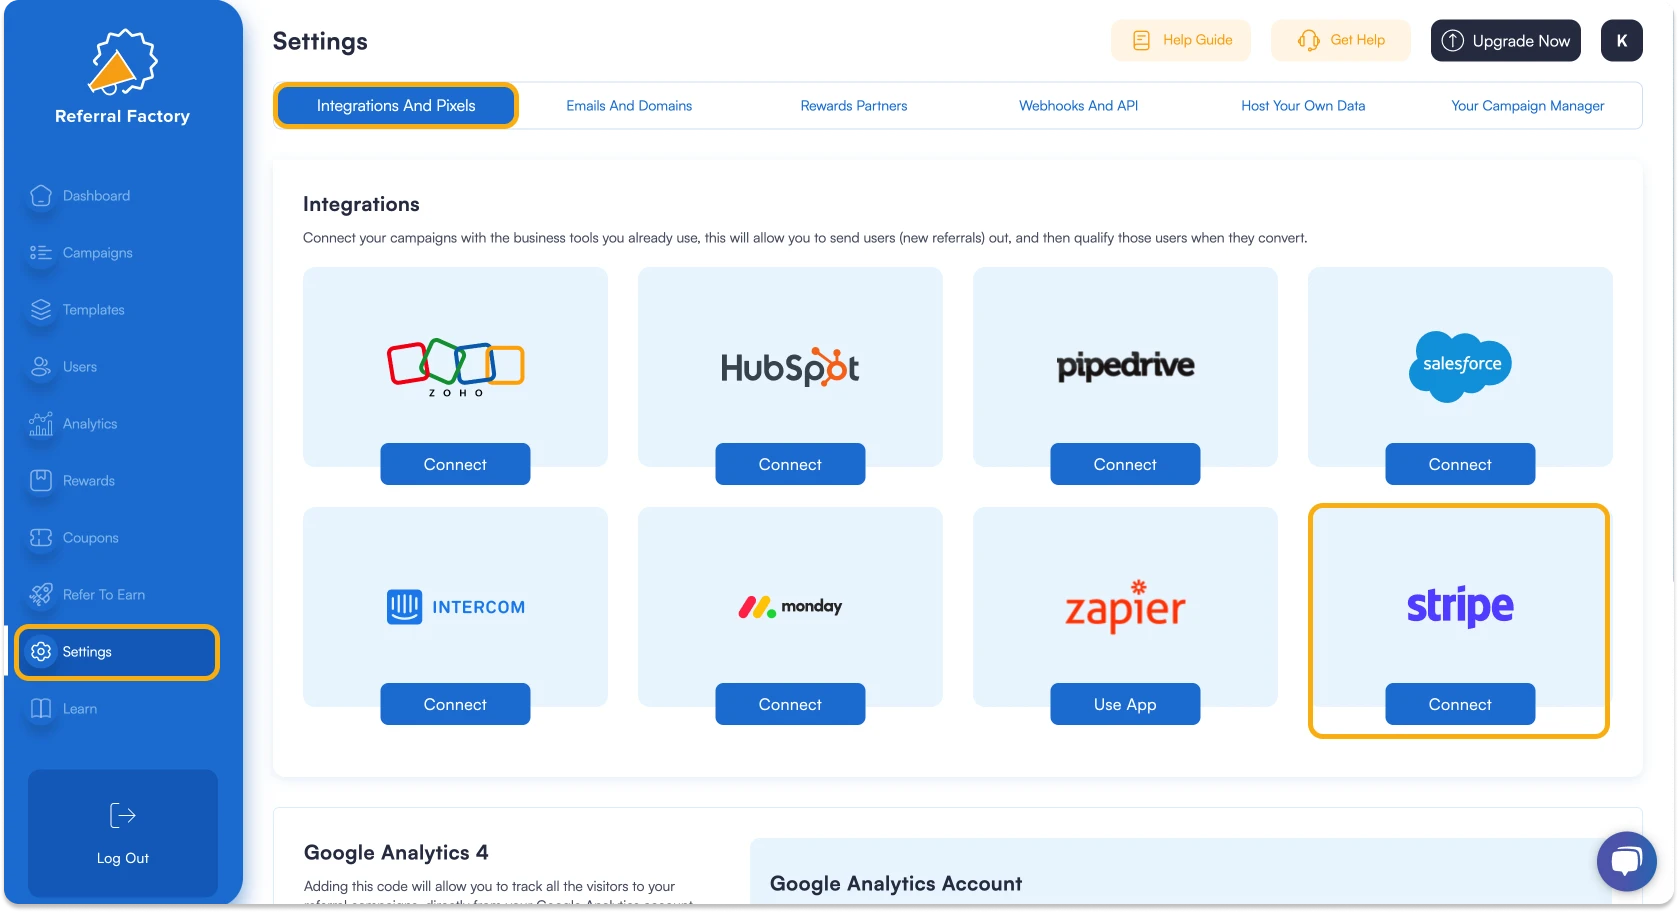 Screenshot showing how connect Stripe for your referral program software In Referral Factory.